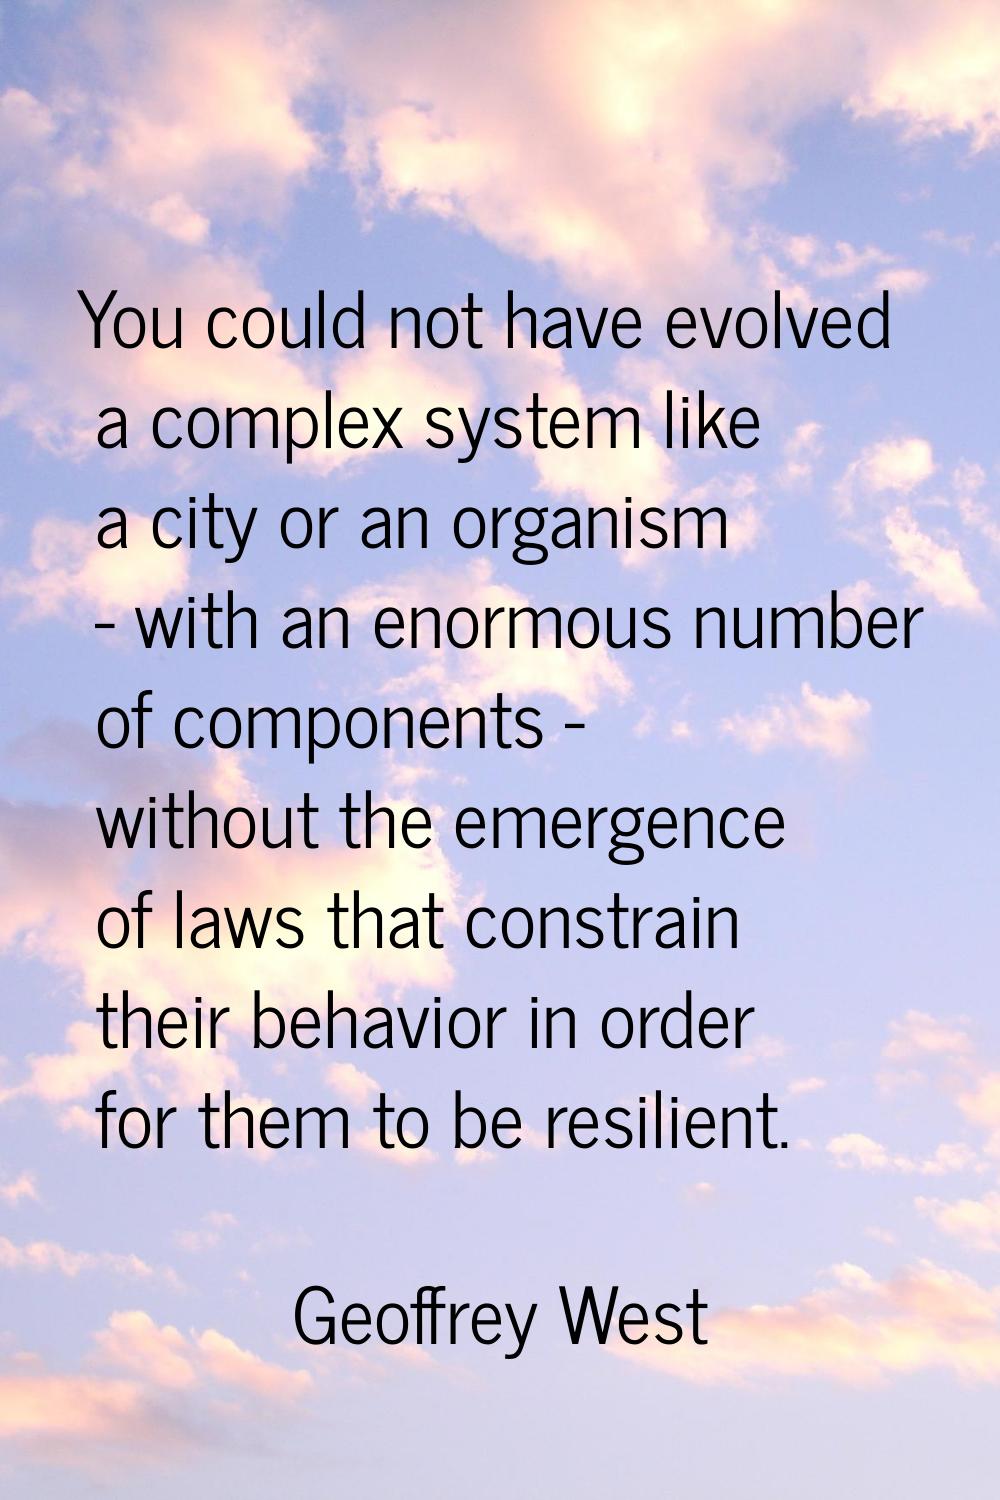 You could not have evolved a complex system like a city or an organism - with an enormous number of